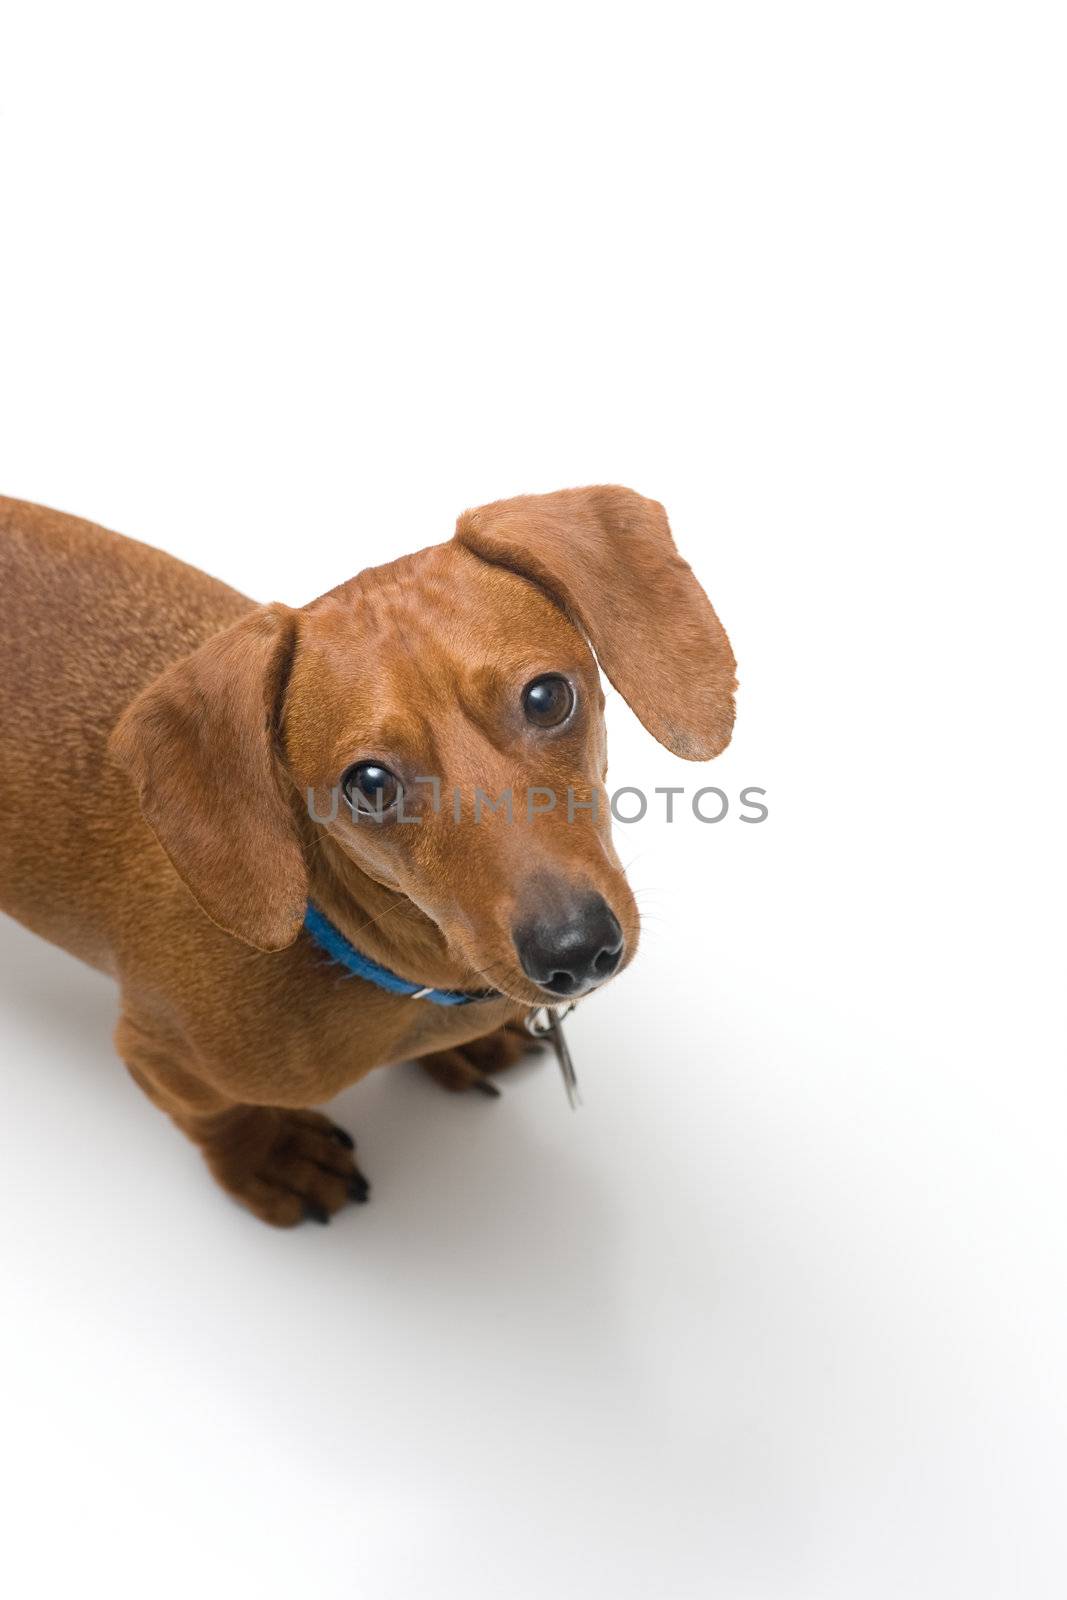 Miniature Dachshund looking up at camera on white by woodygraphs